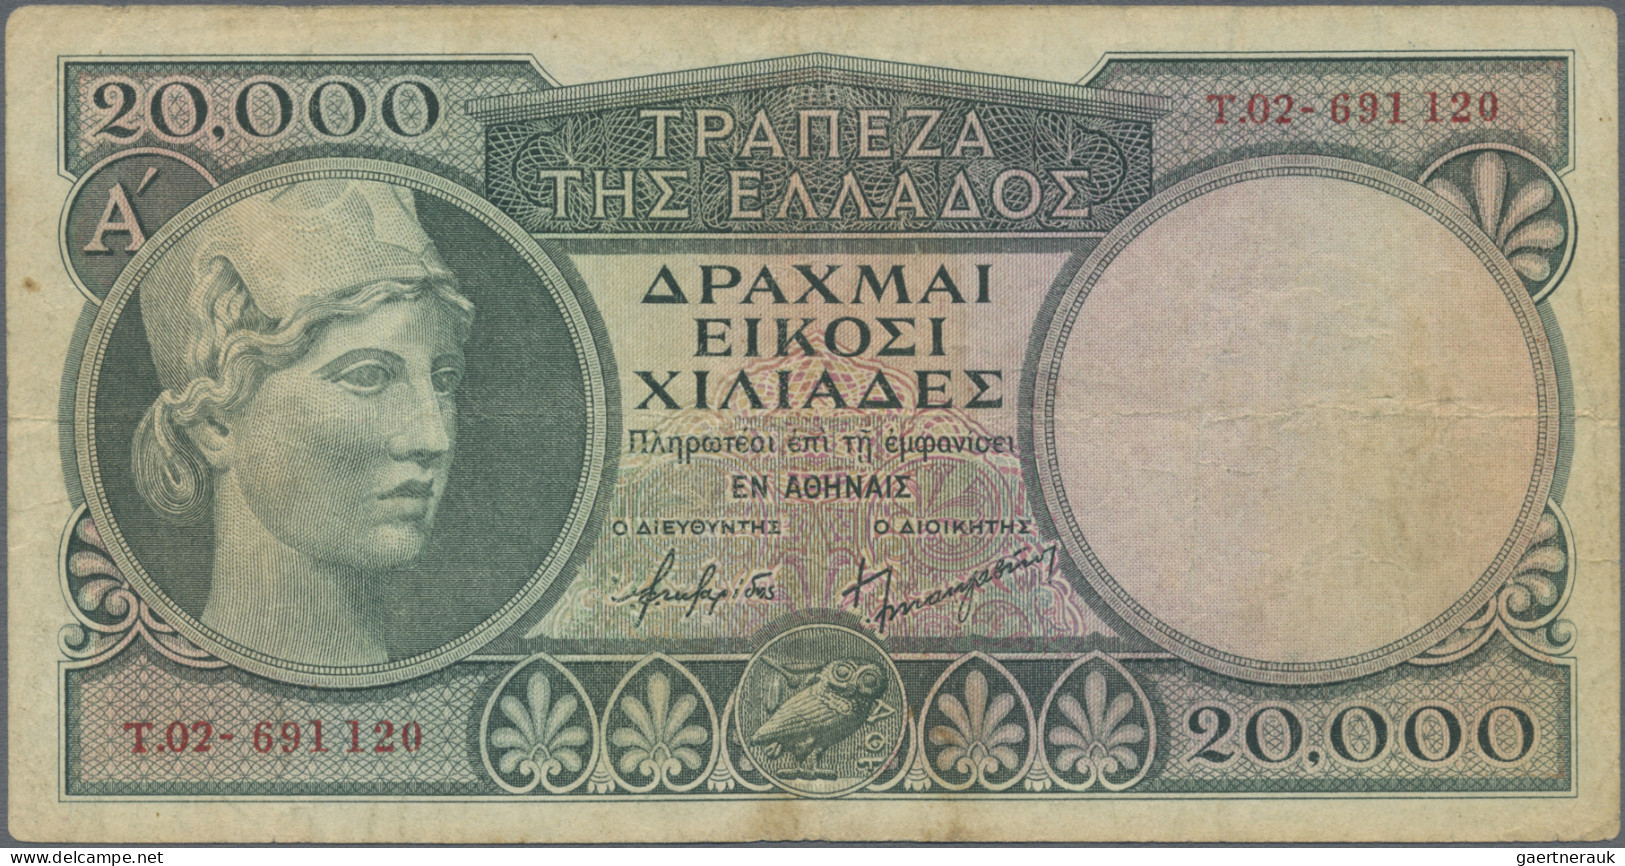 Greece: Bank of Greece, lot with 5 banknotes, series 1945-1947, with 5.000 Drach